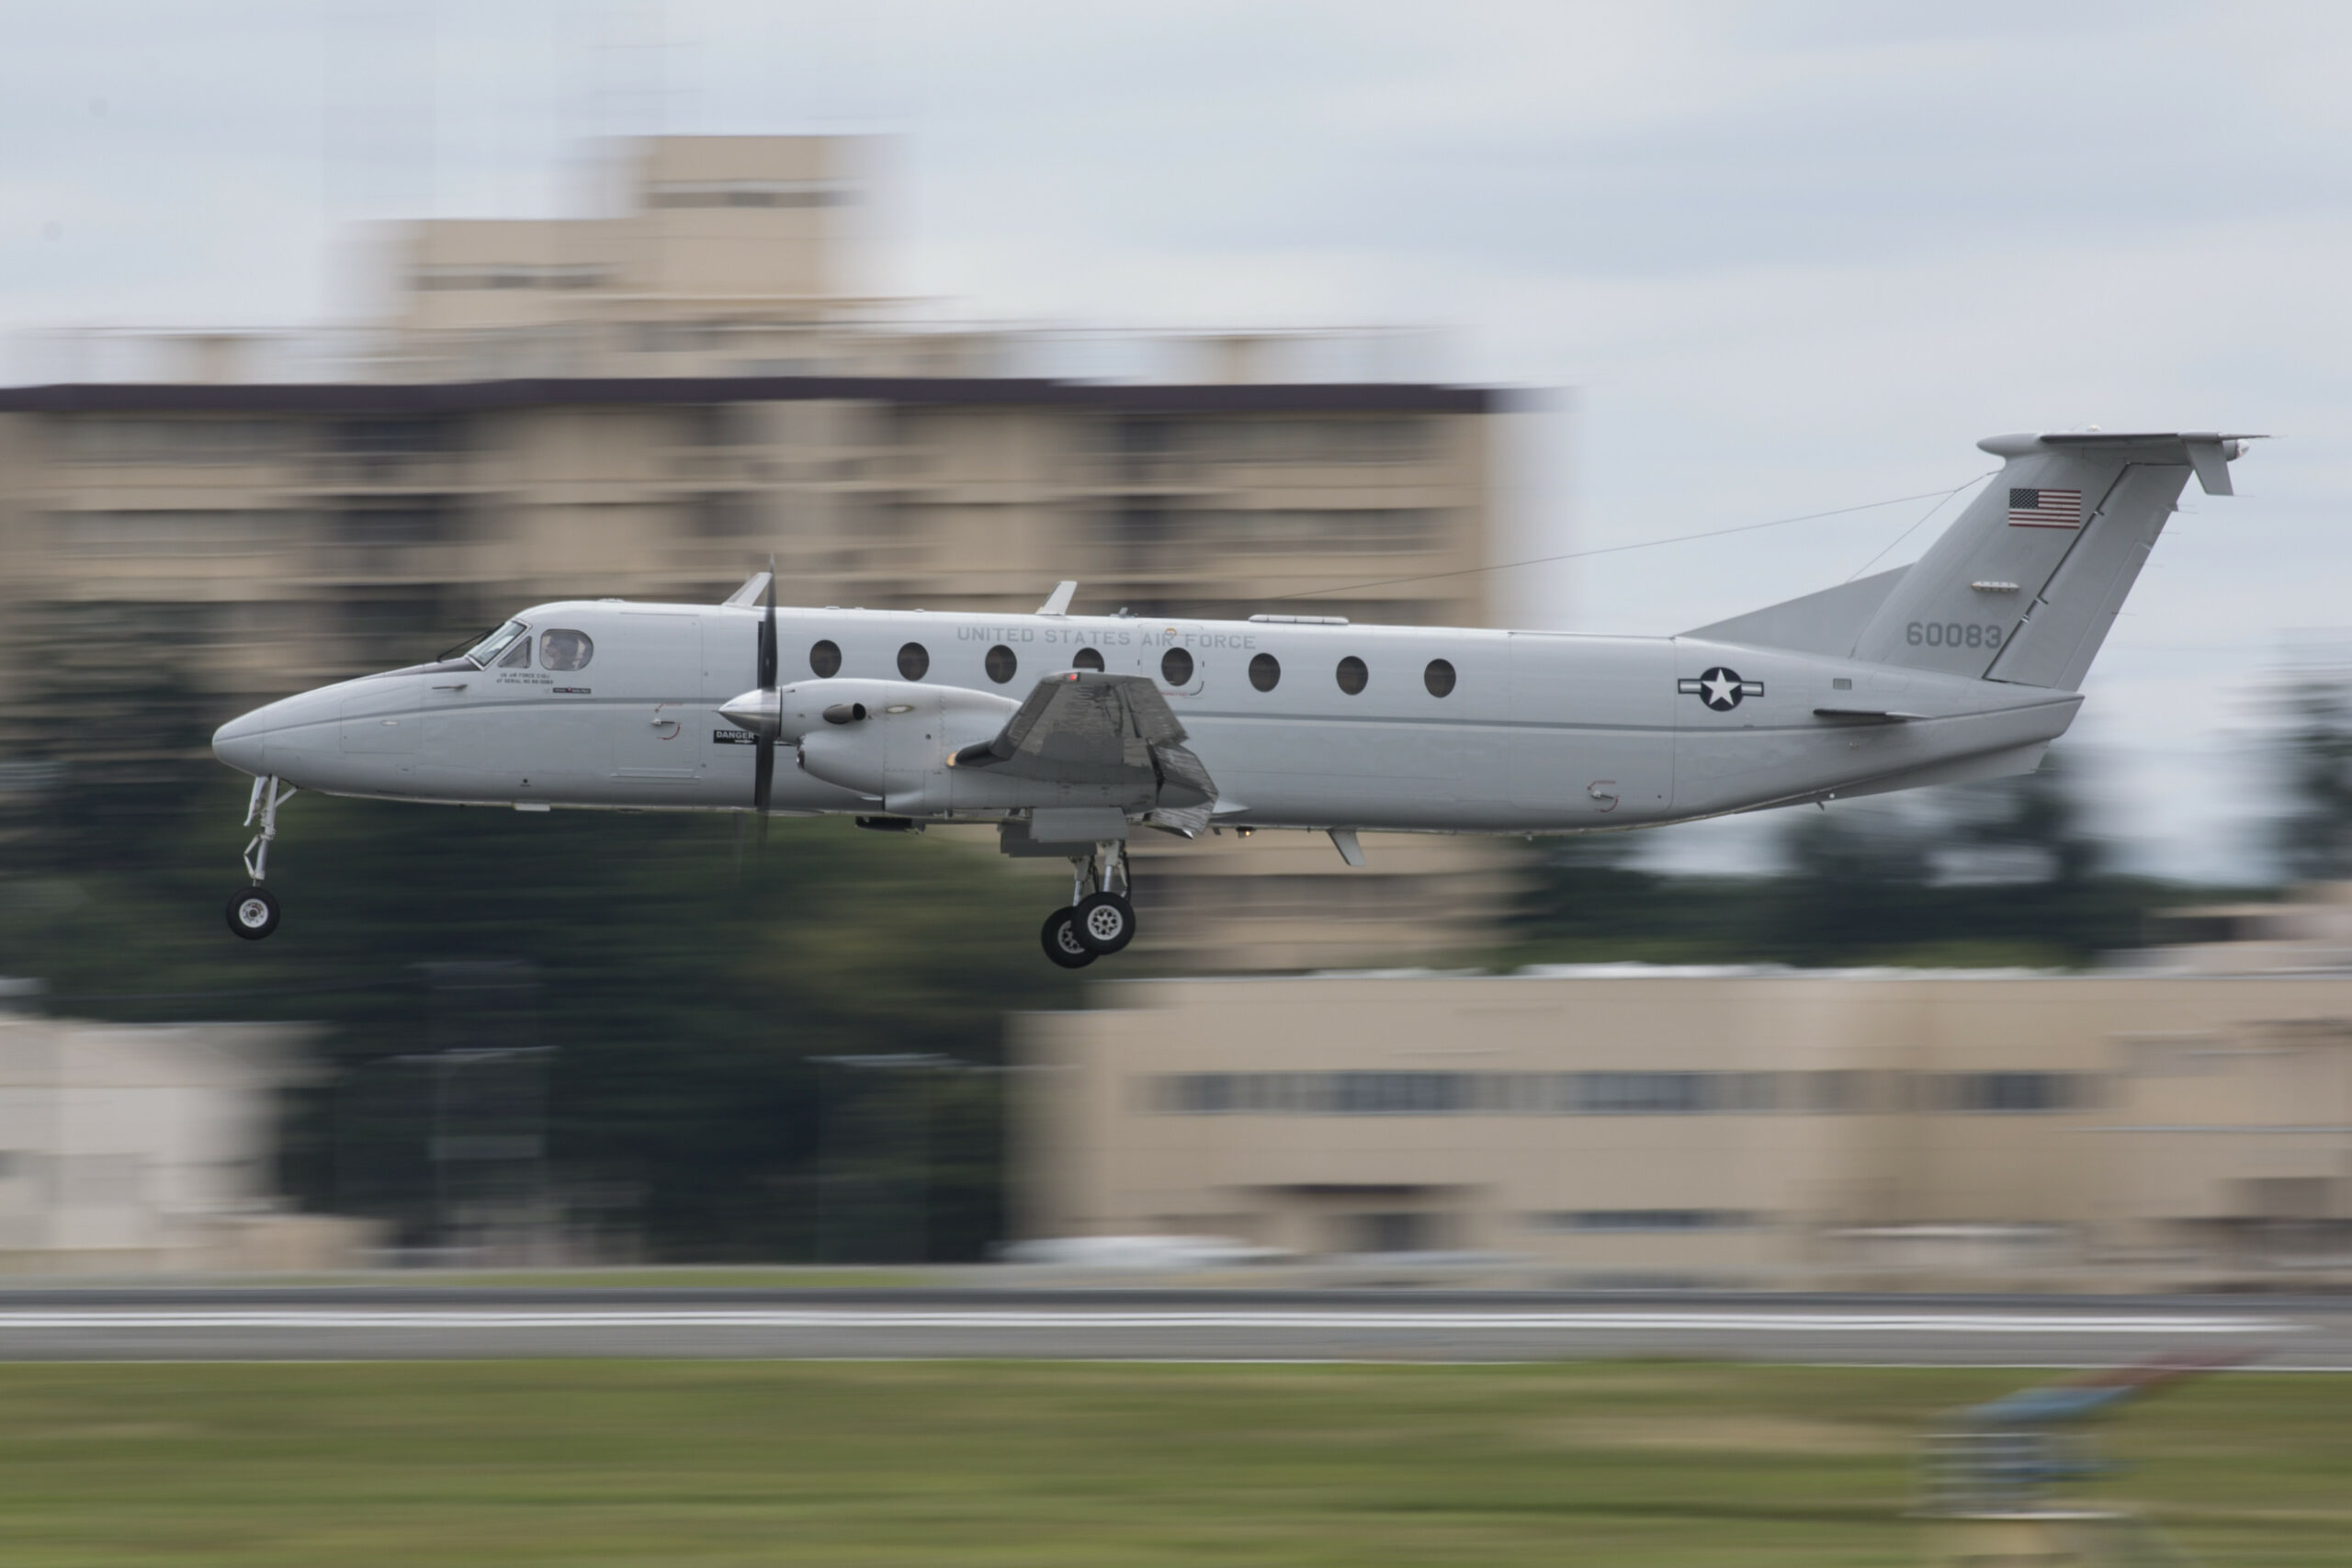 A C-12J Huron, assigned to the 459th Airlift Squadron, performs touch-and-go flight patterns June 14, 2016 at Yokota Air Base, Japan. The C-12J is a twin turboprop aircraft used for cargo and passenger airlift and aeromedical evacuations. (U.S. Air Force photo by Yasuo Osakabe/Released)